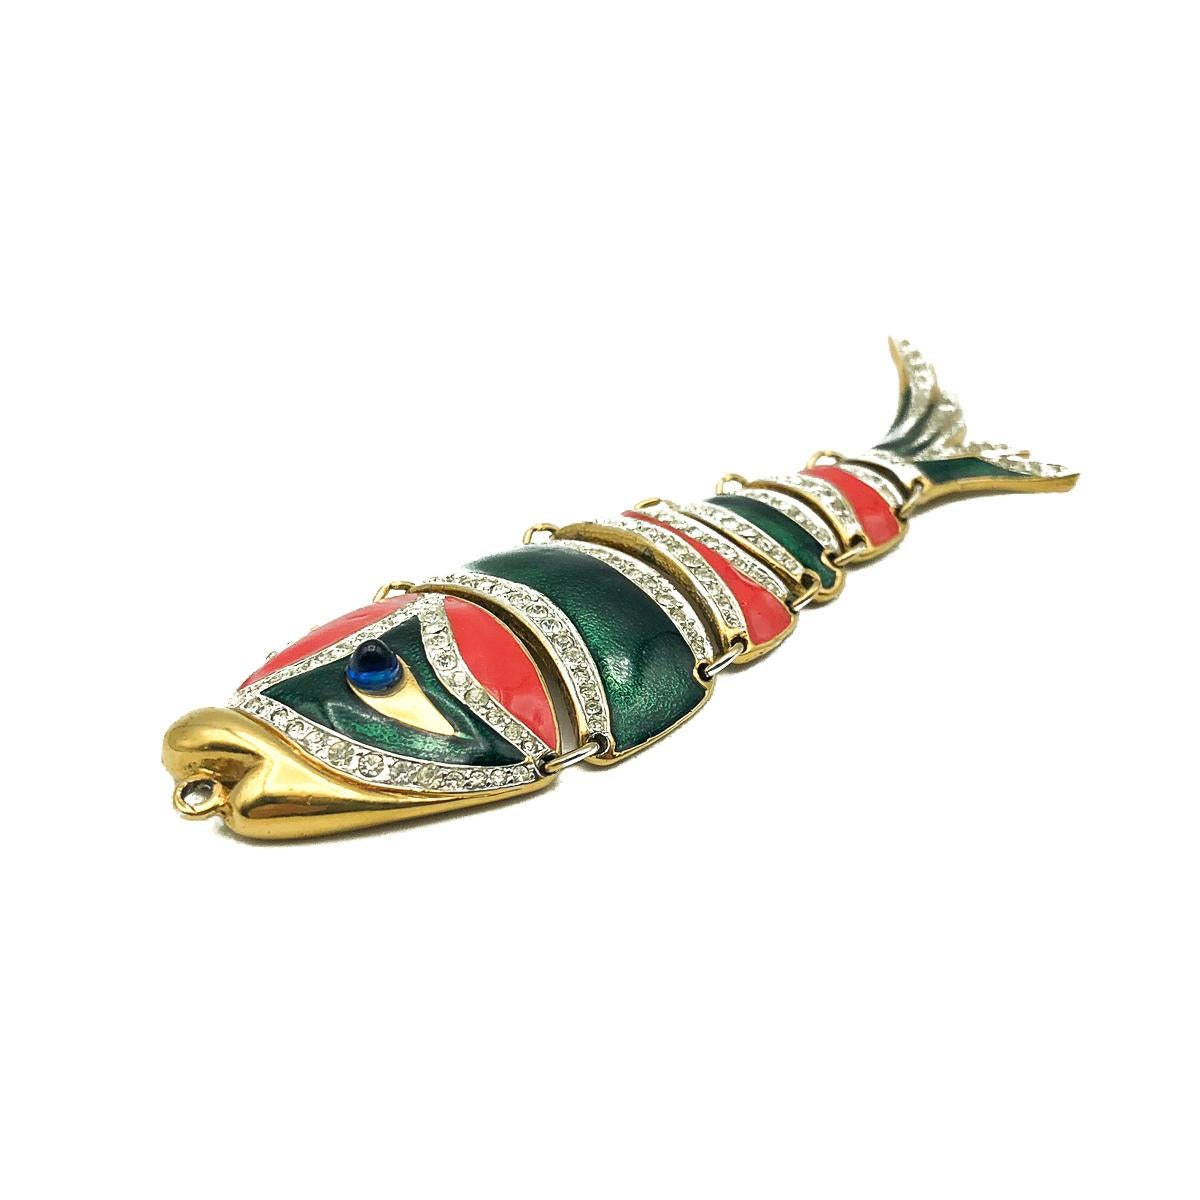 A stunning and quirky Vintage D'Orlan Enamel Fish Necklace. Crafted in gold plated metal and adorned with red and green enamelling, white crystal detail and a gorgeous blue glass cabochon for the eye. The articulation providing perfect movement when